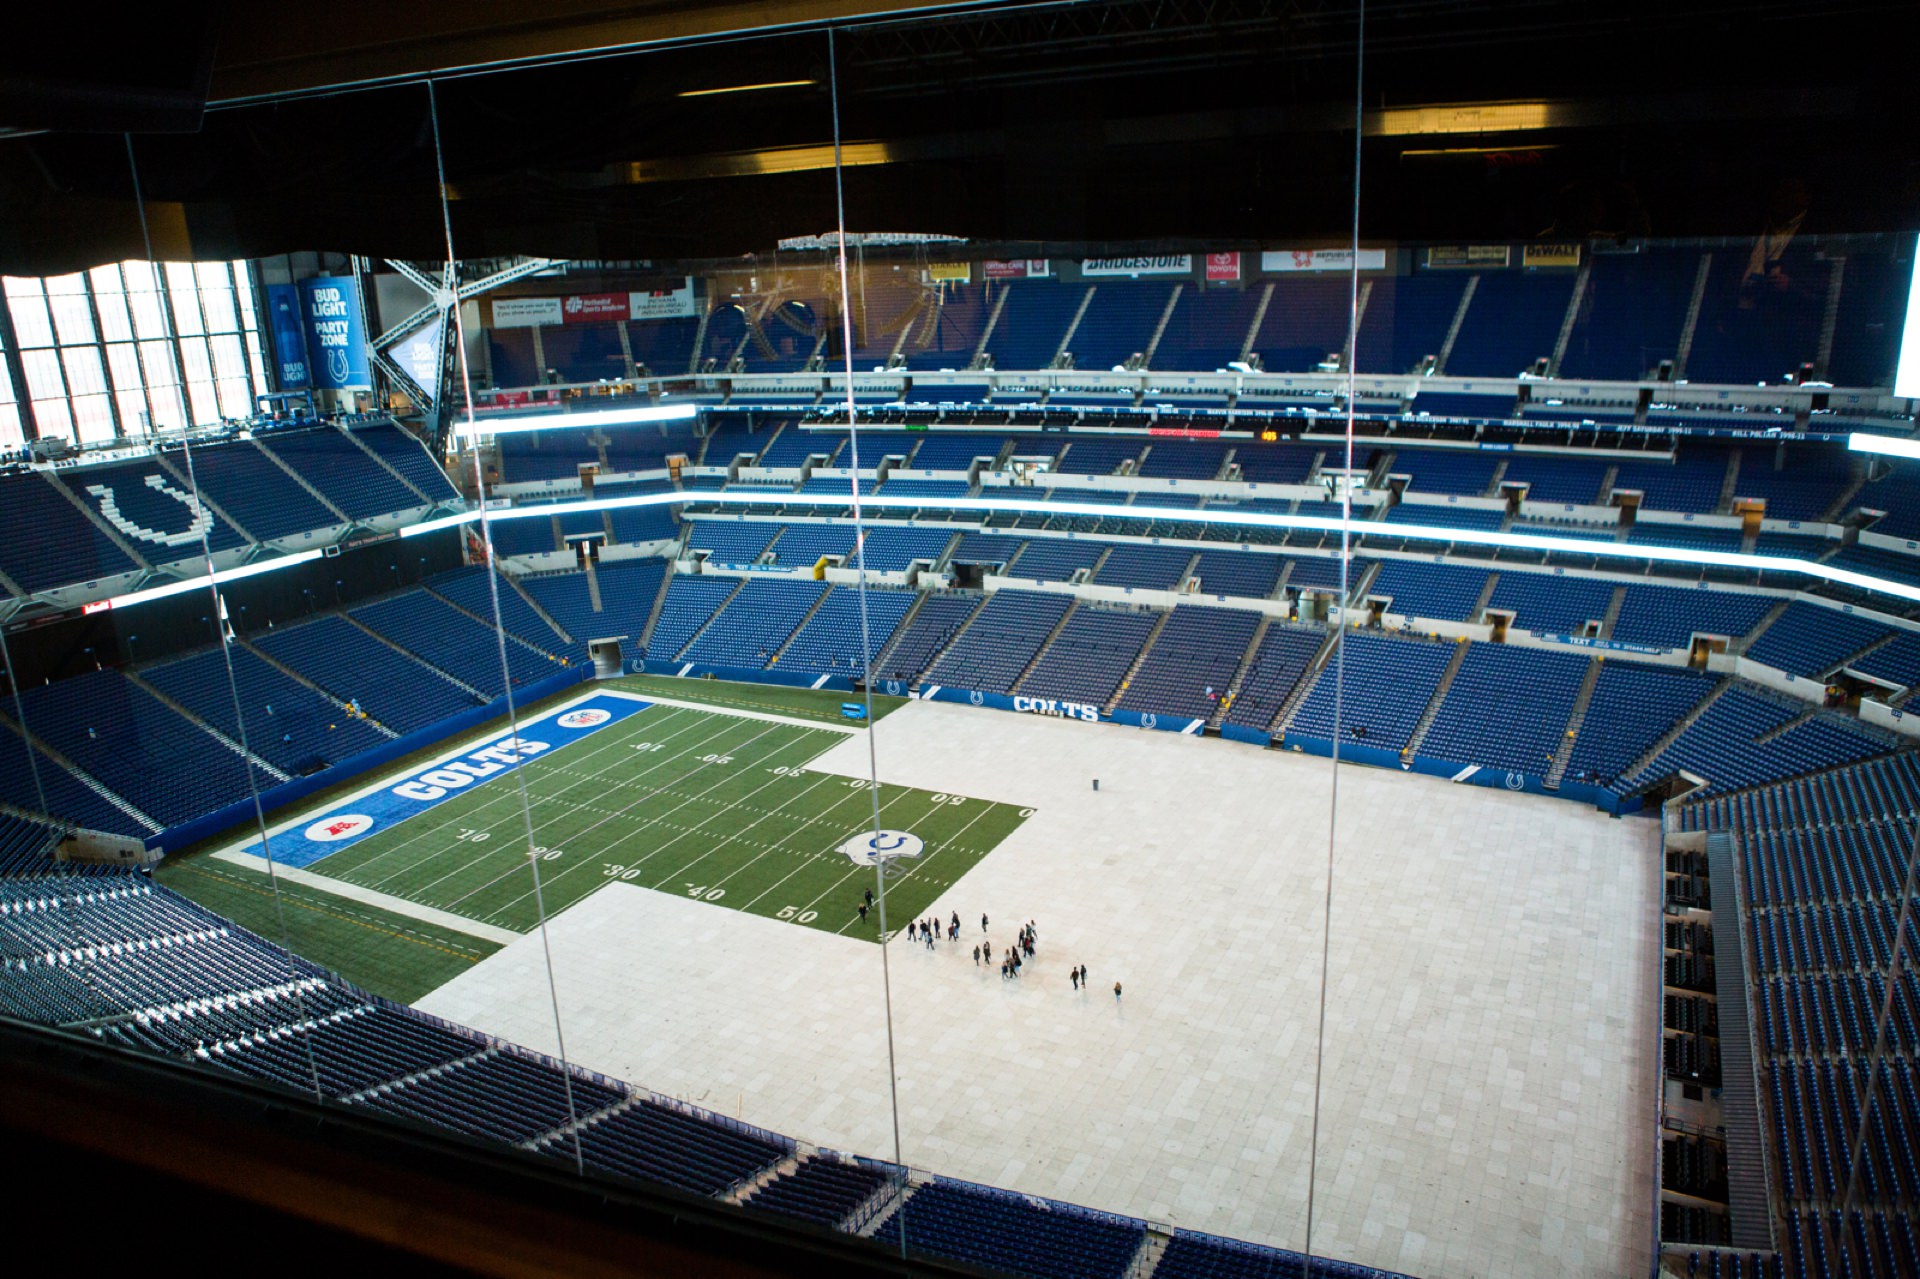 lucas oil stadium completely empty during an event